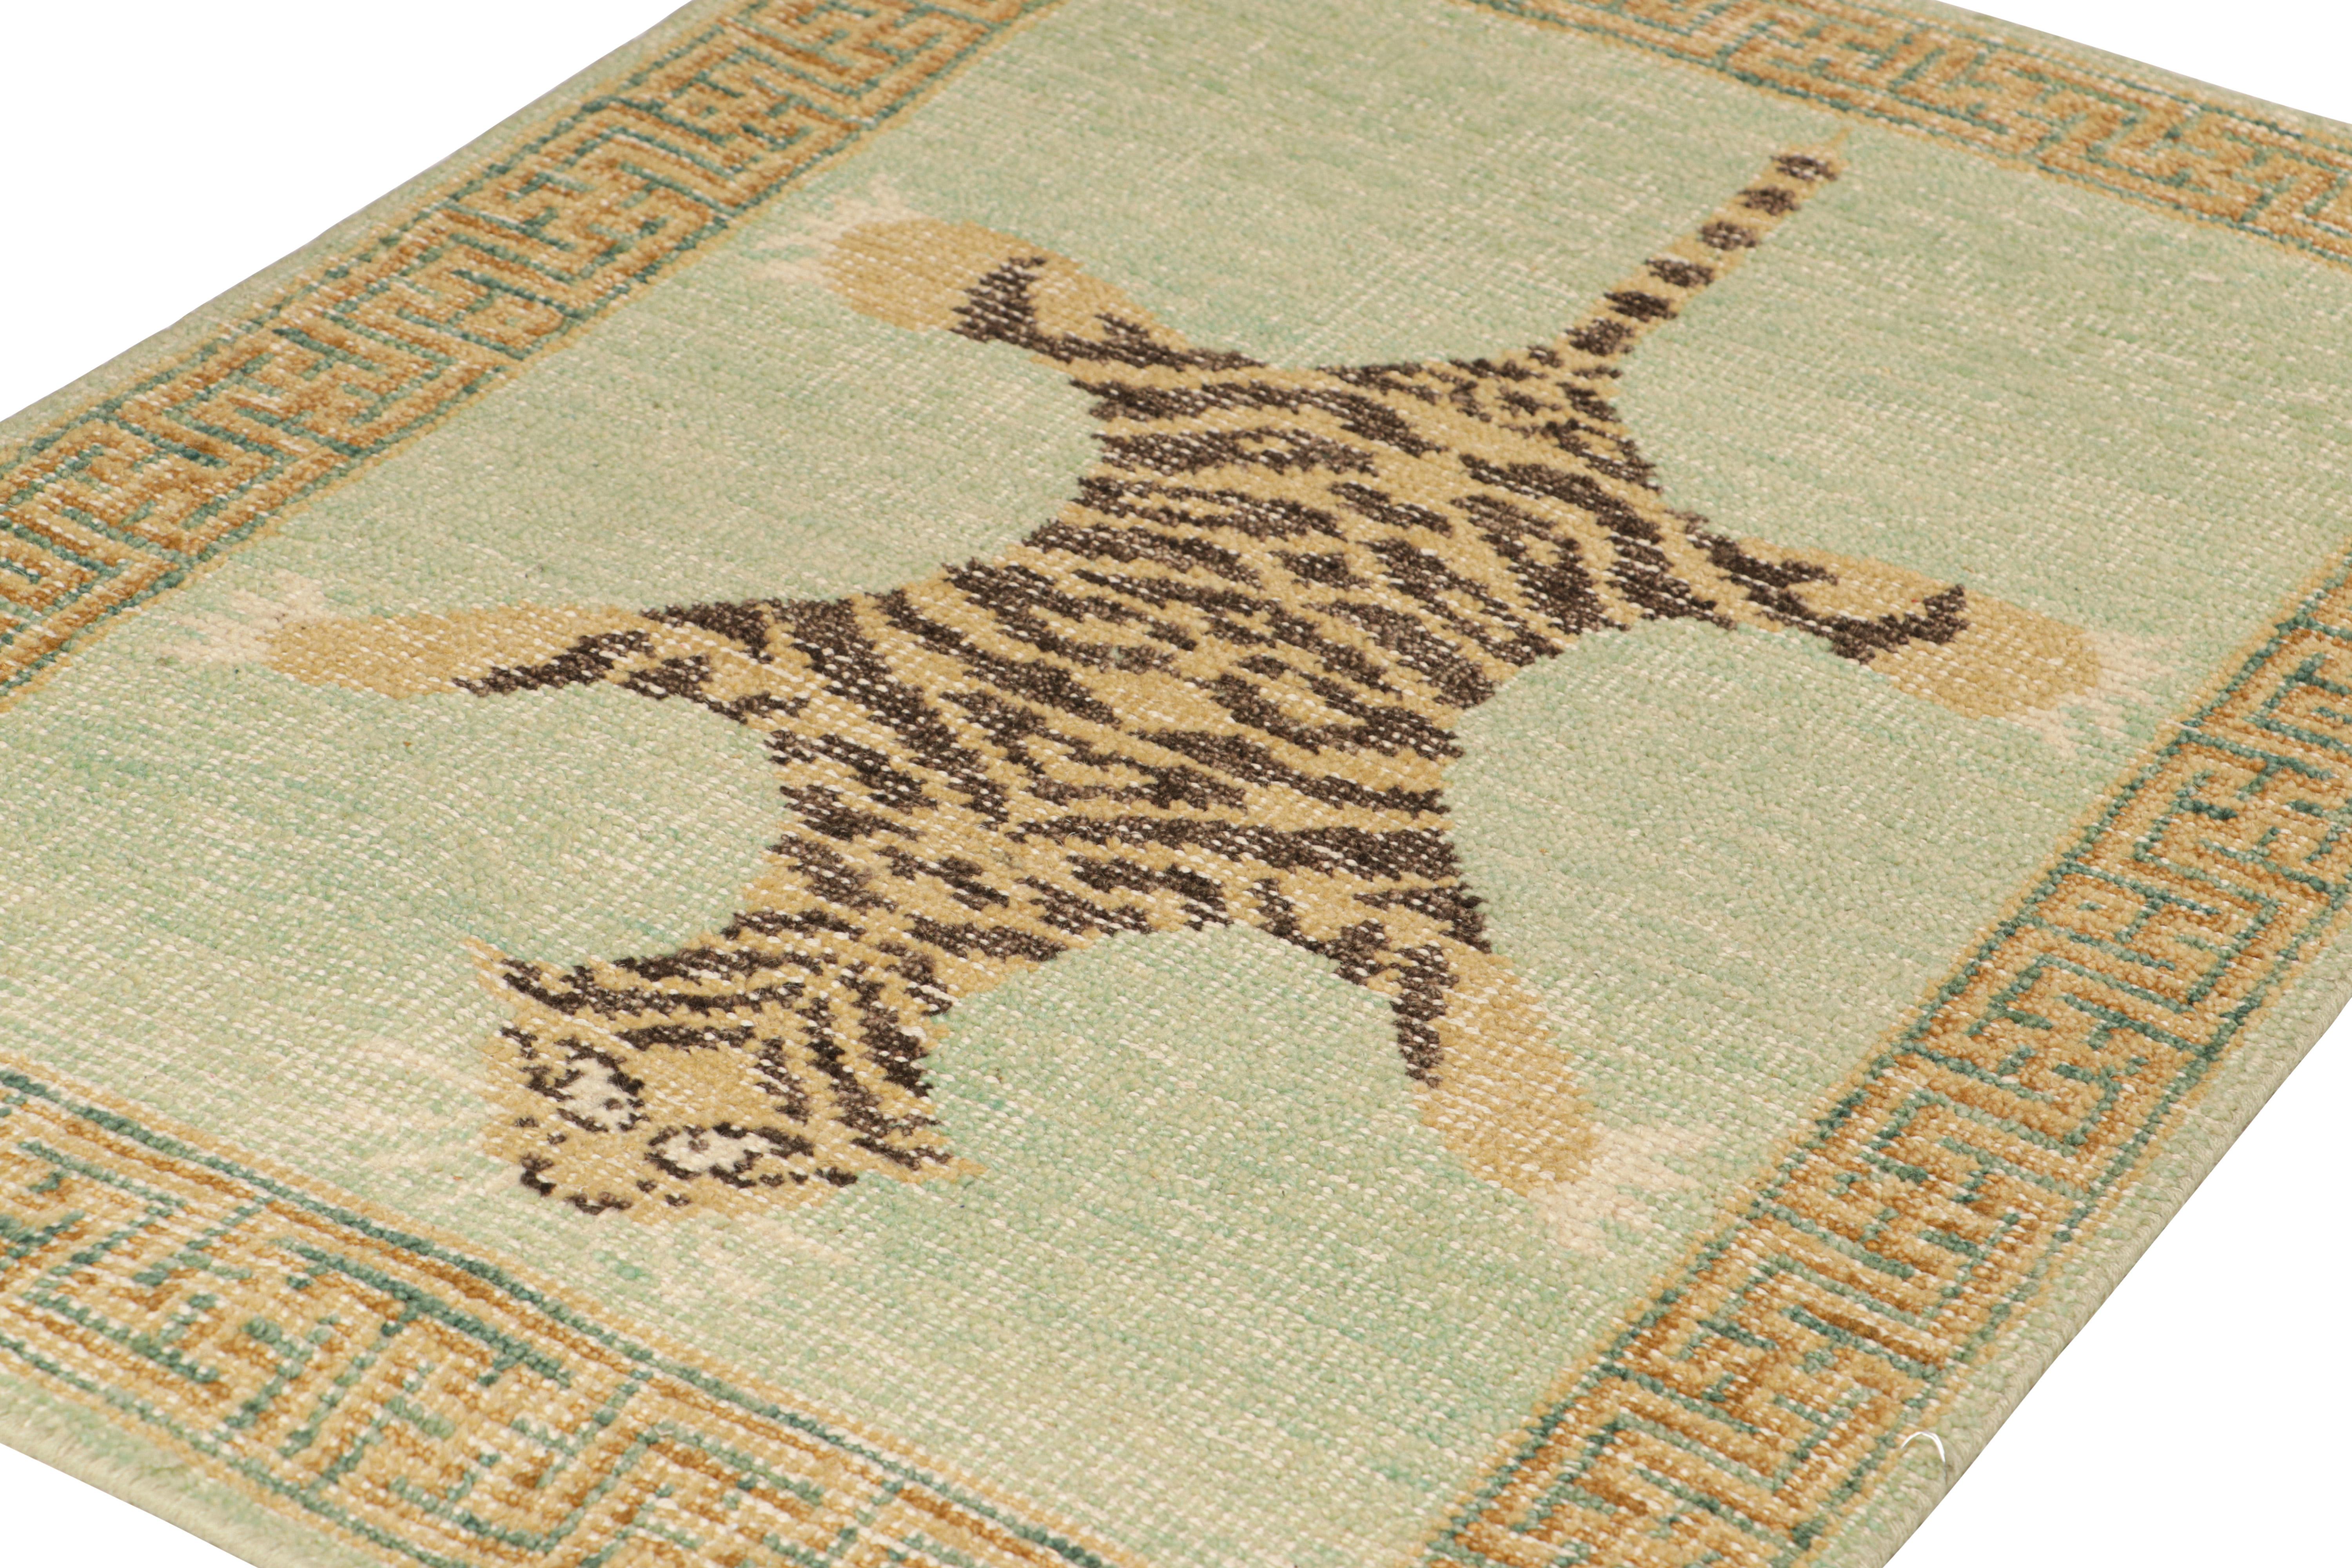 Hand-Knotted Rug & Kilim’s Modern Tiger Skin Accent Pictorial Rug in Green, Beige and Black For Sale